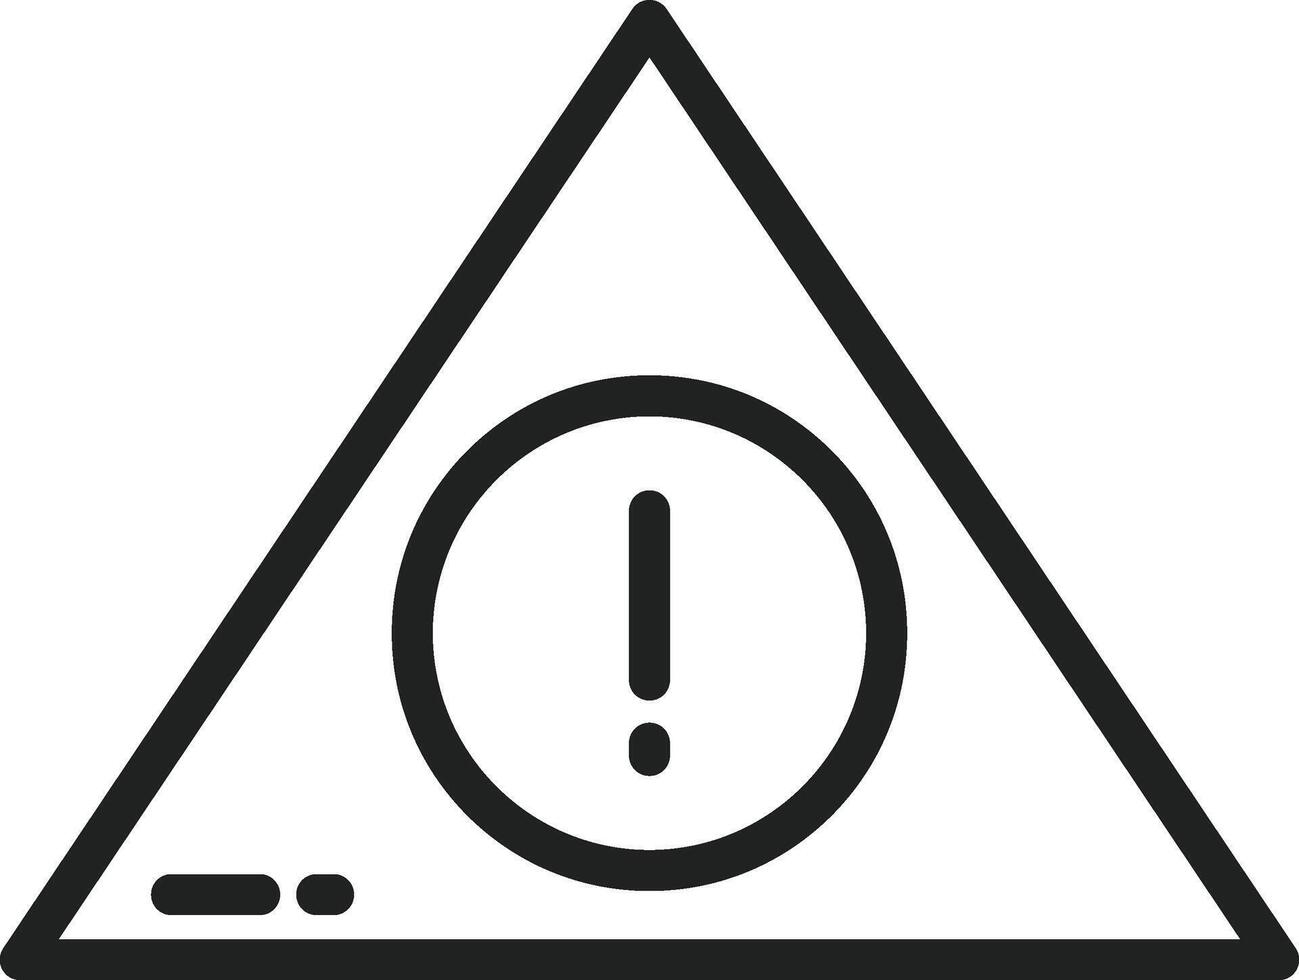 Warning icon vector image. Suitable for mobile apps, web apps and print media.